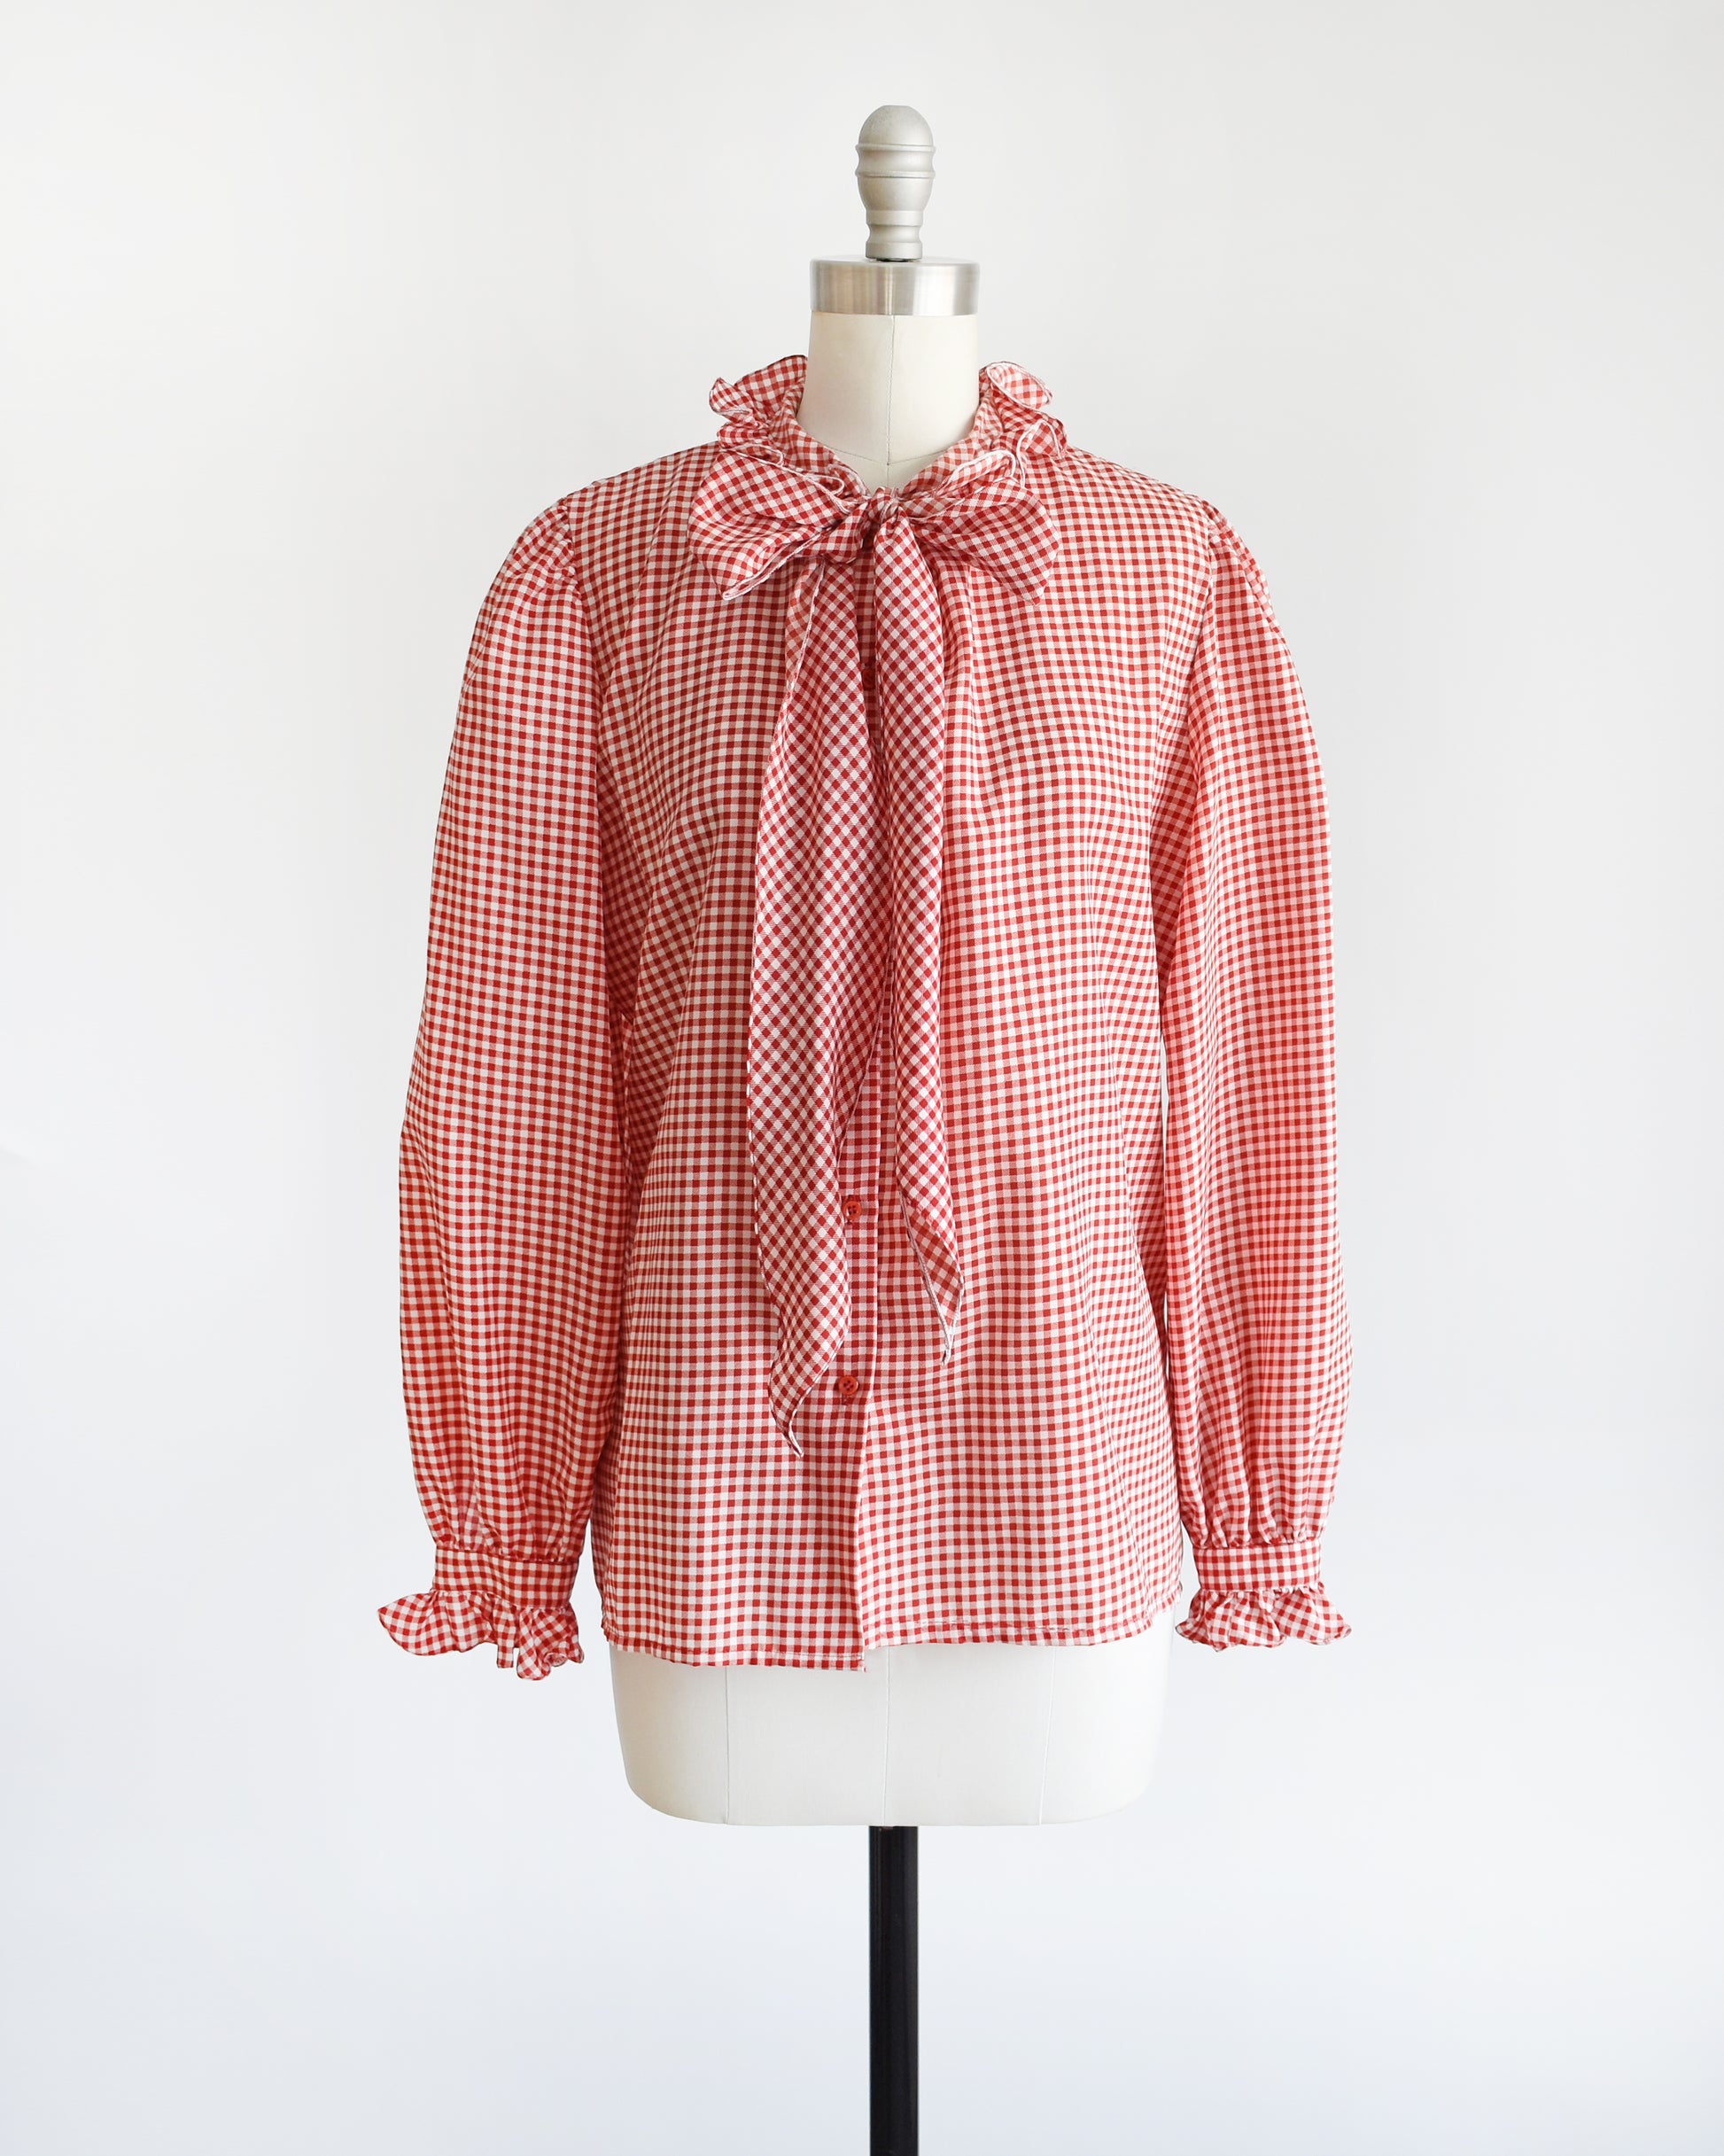 A A vintage 1980s red and white gingham blouse with ruffled collar and ascot bow